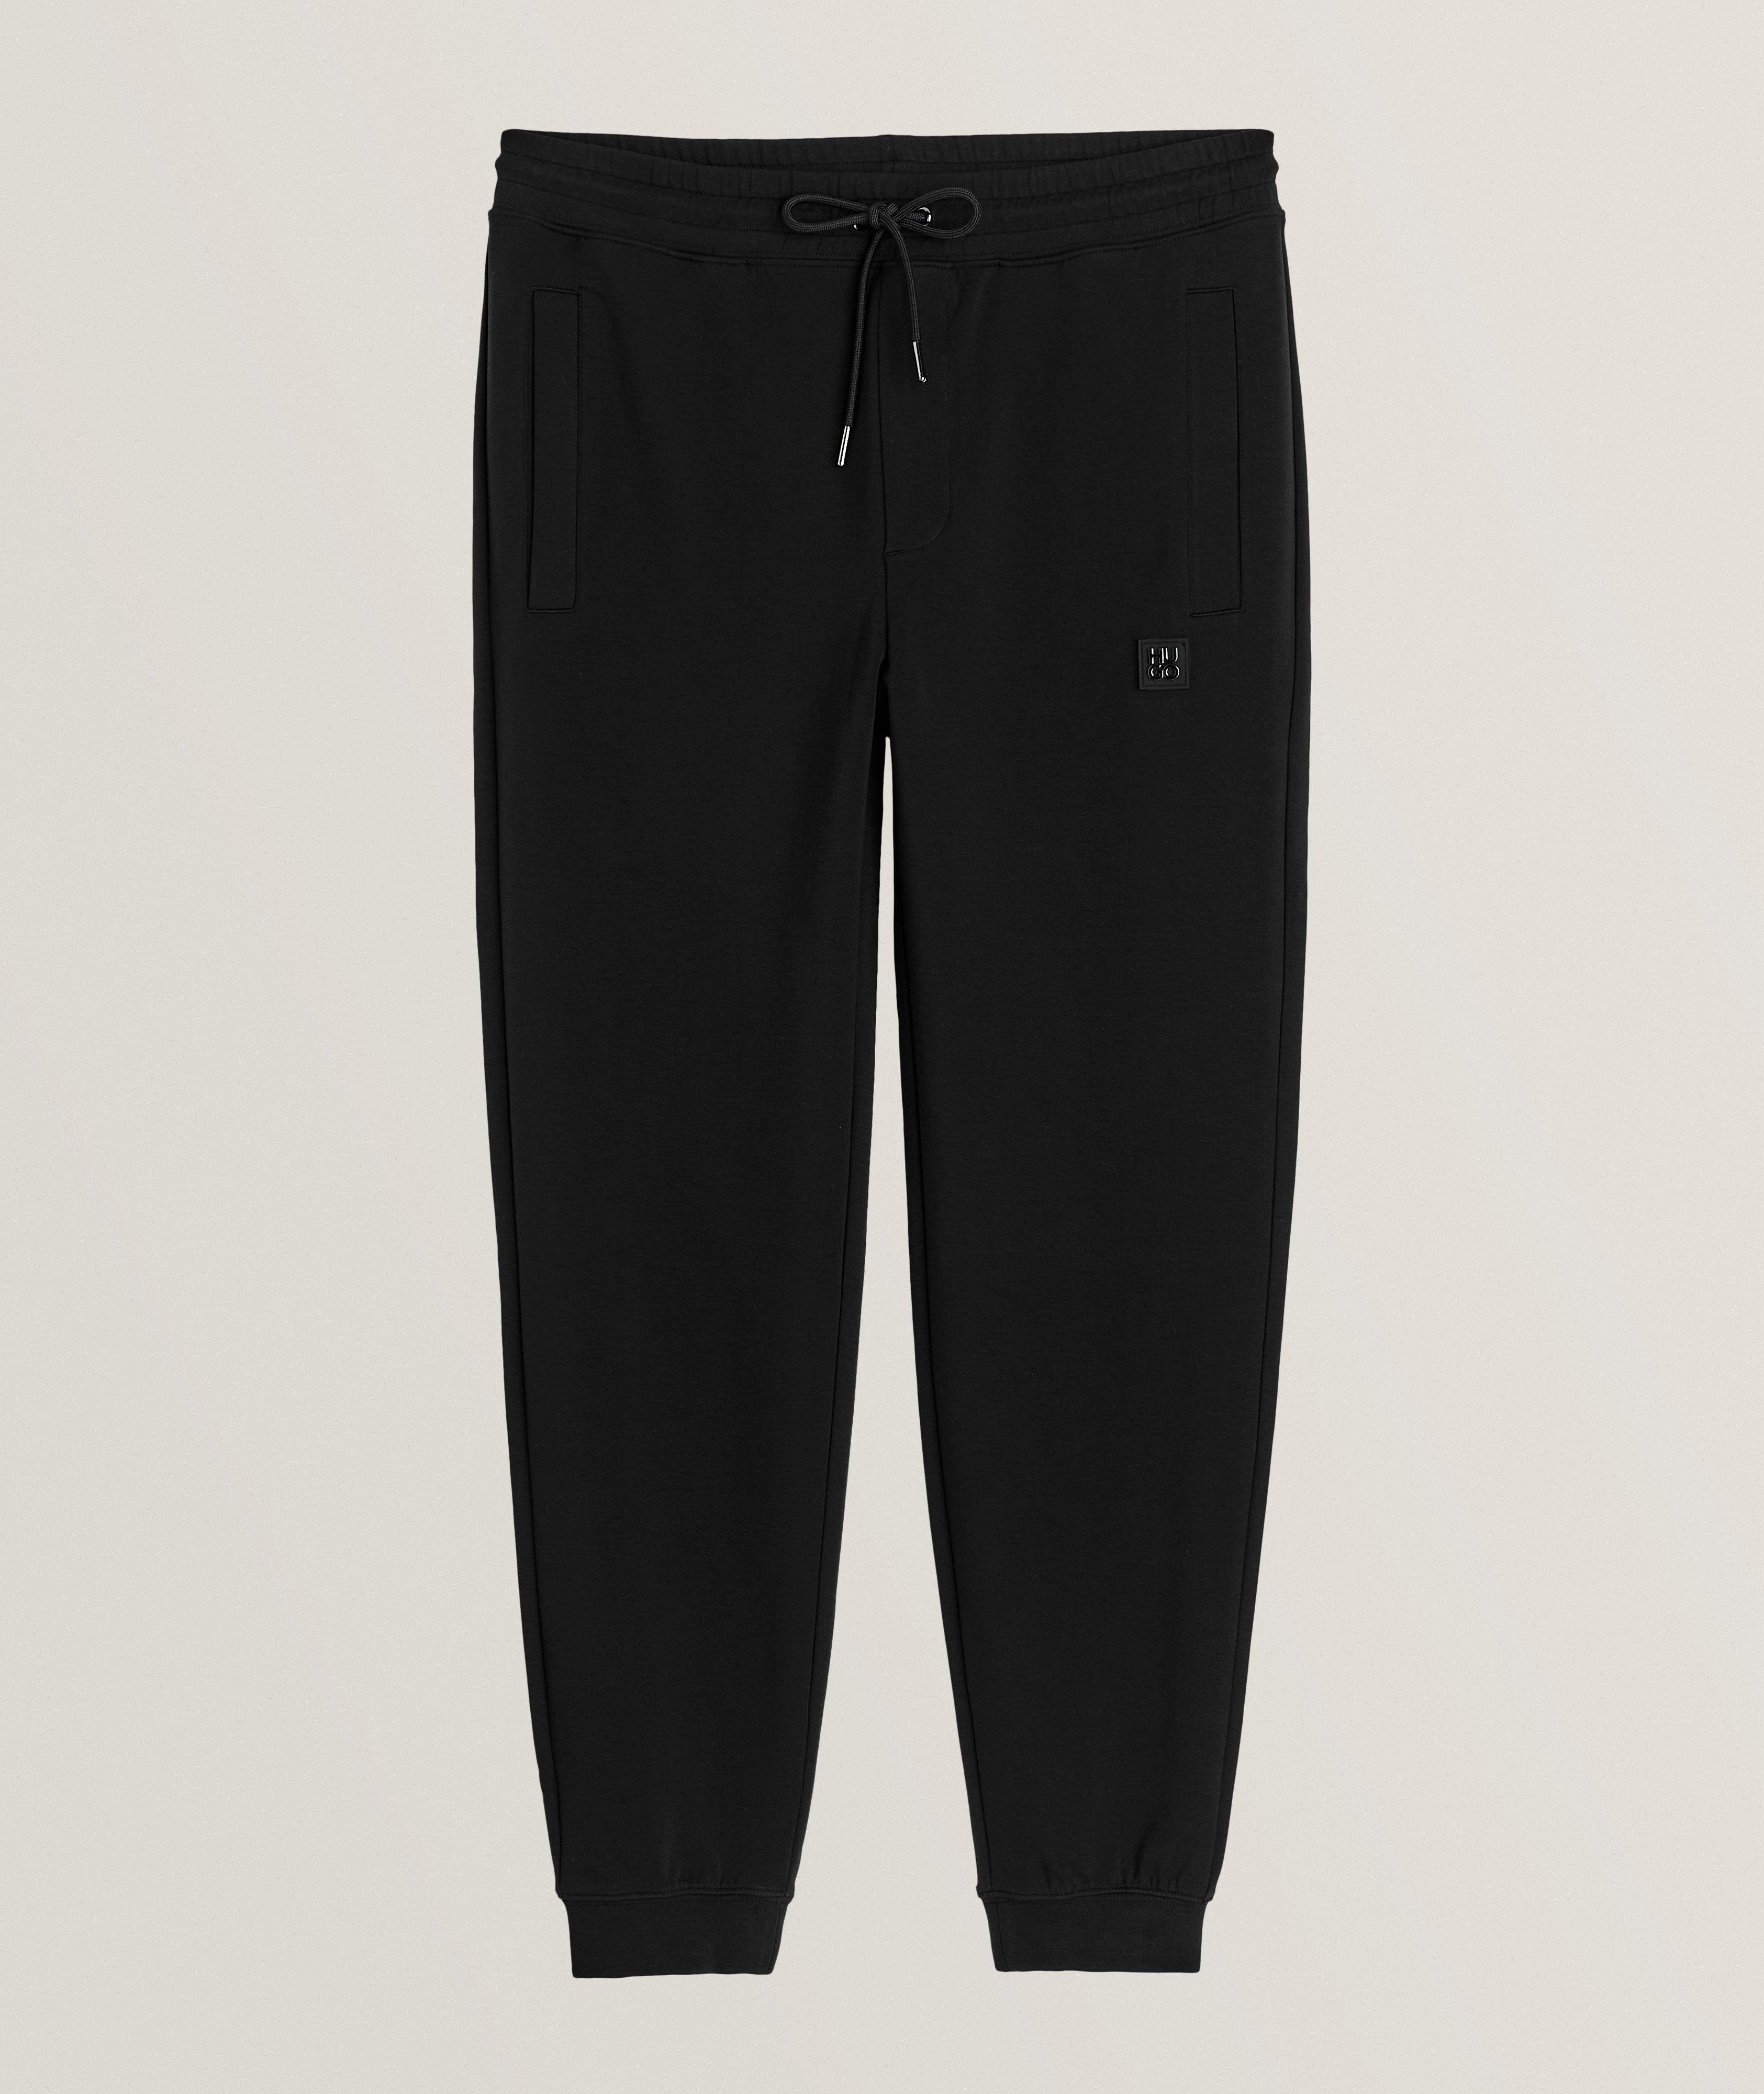 Stacked Logo Stretch-Cotton Sweatpants image 0